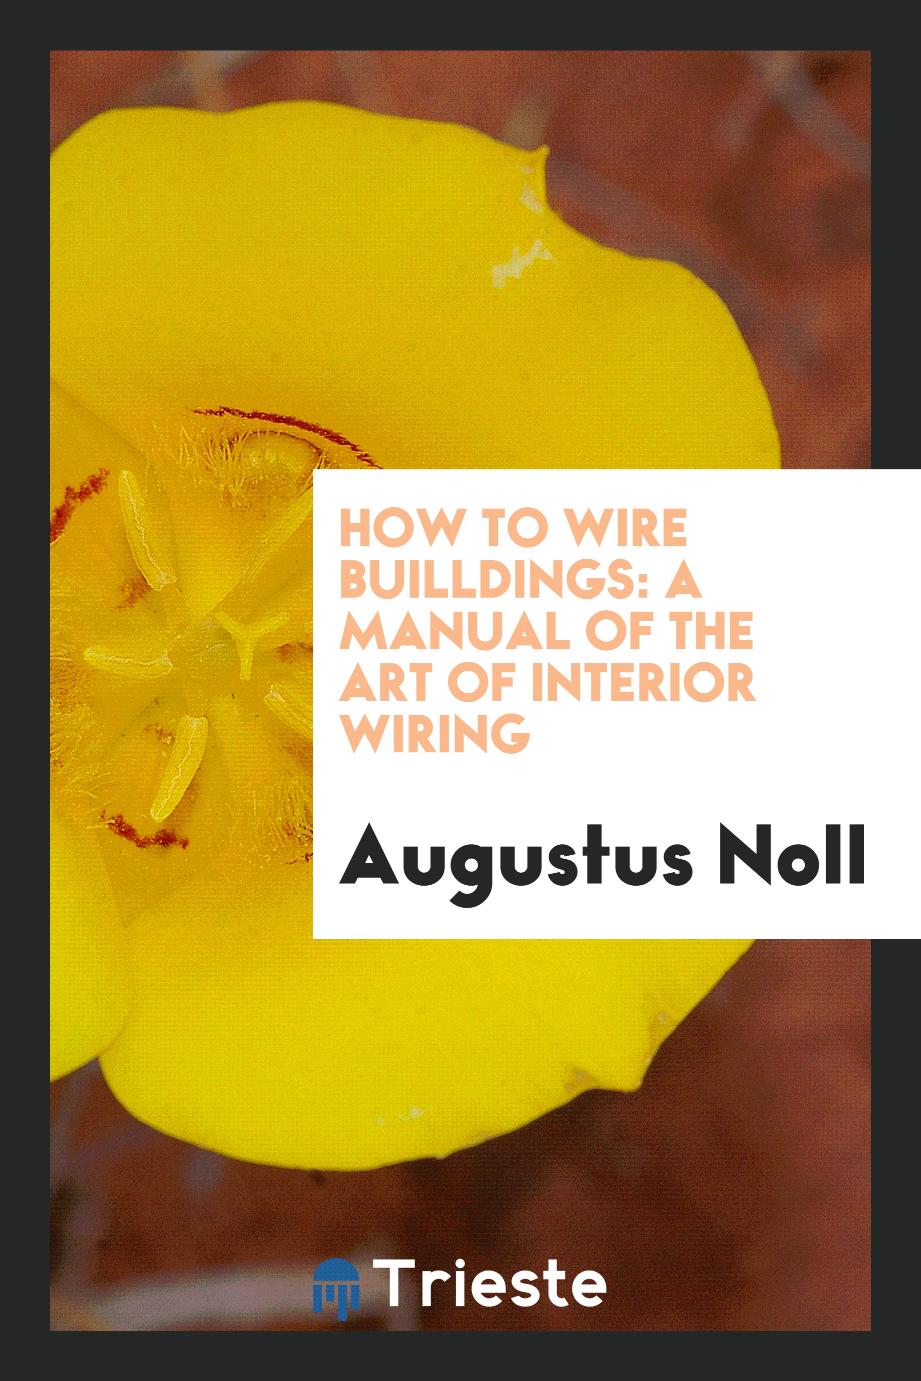 How to Wire Builldings: A Manual of the Art of Interior Wiring